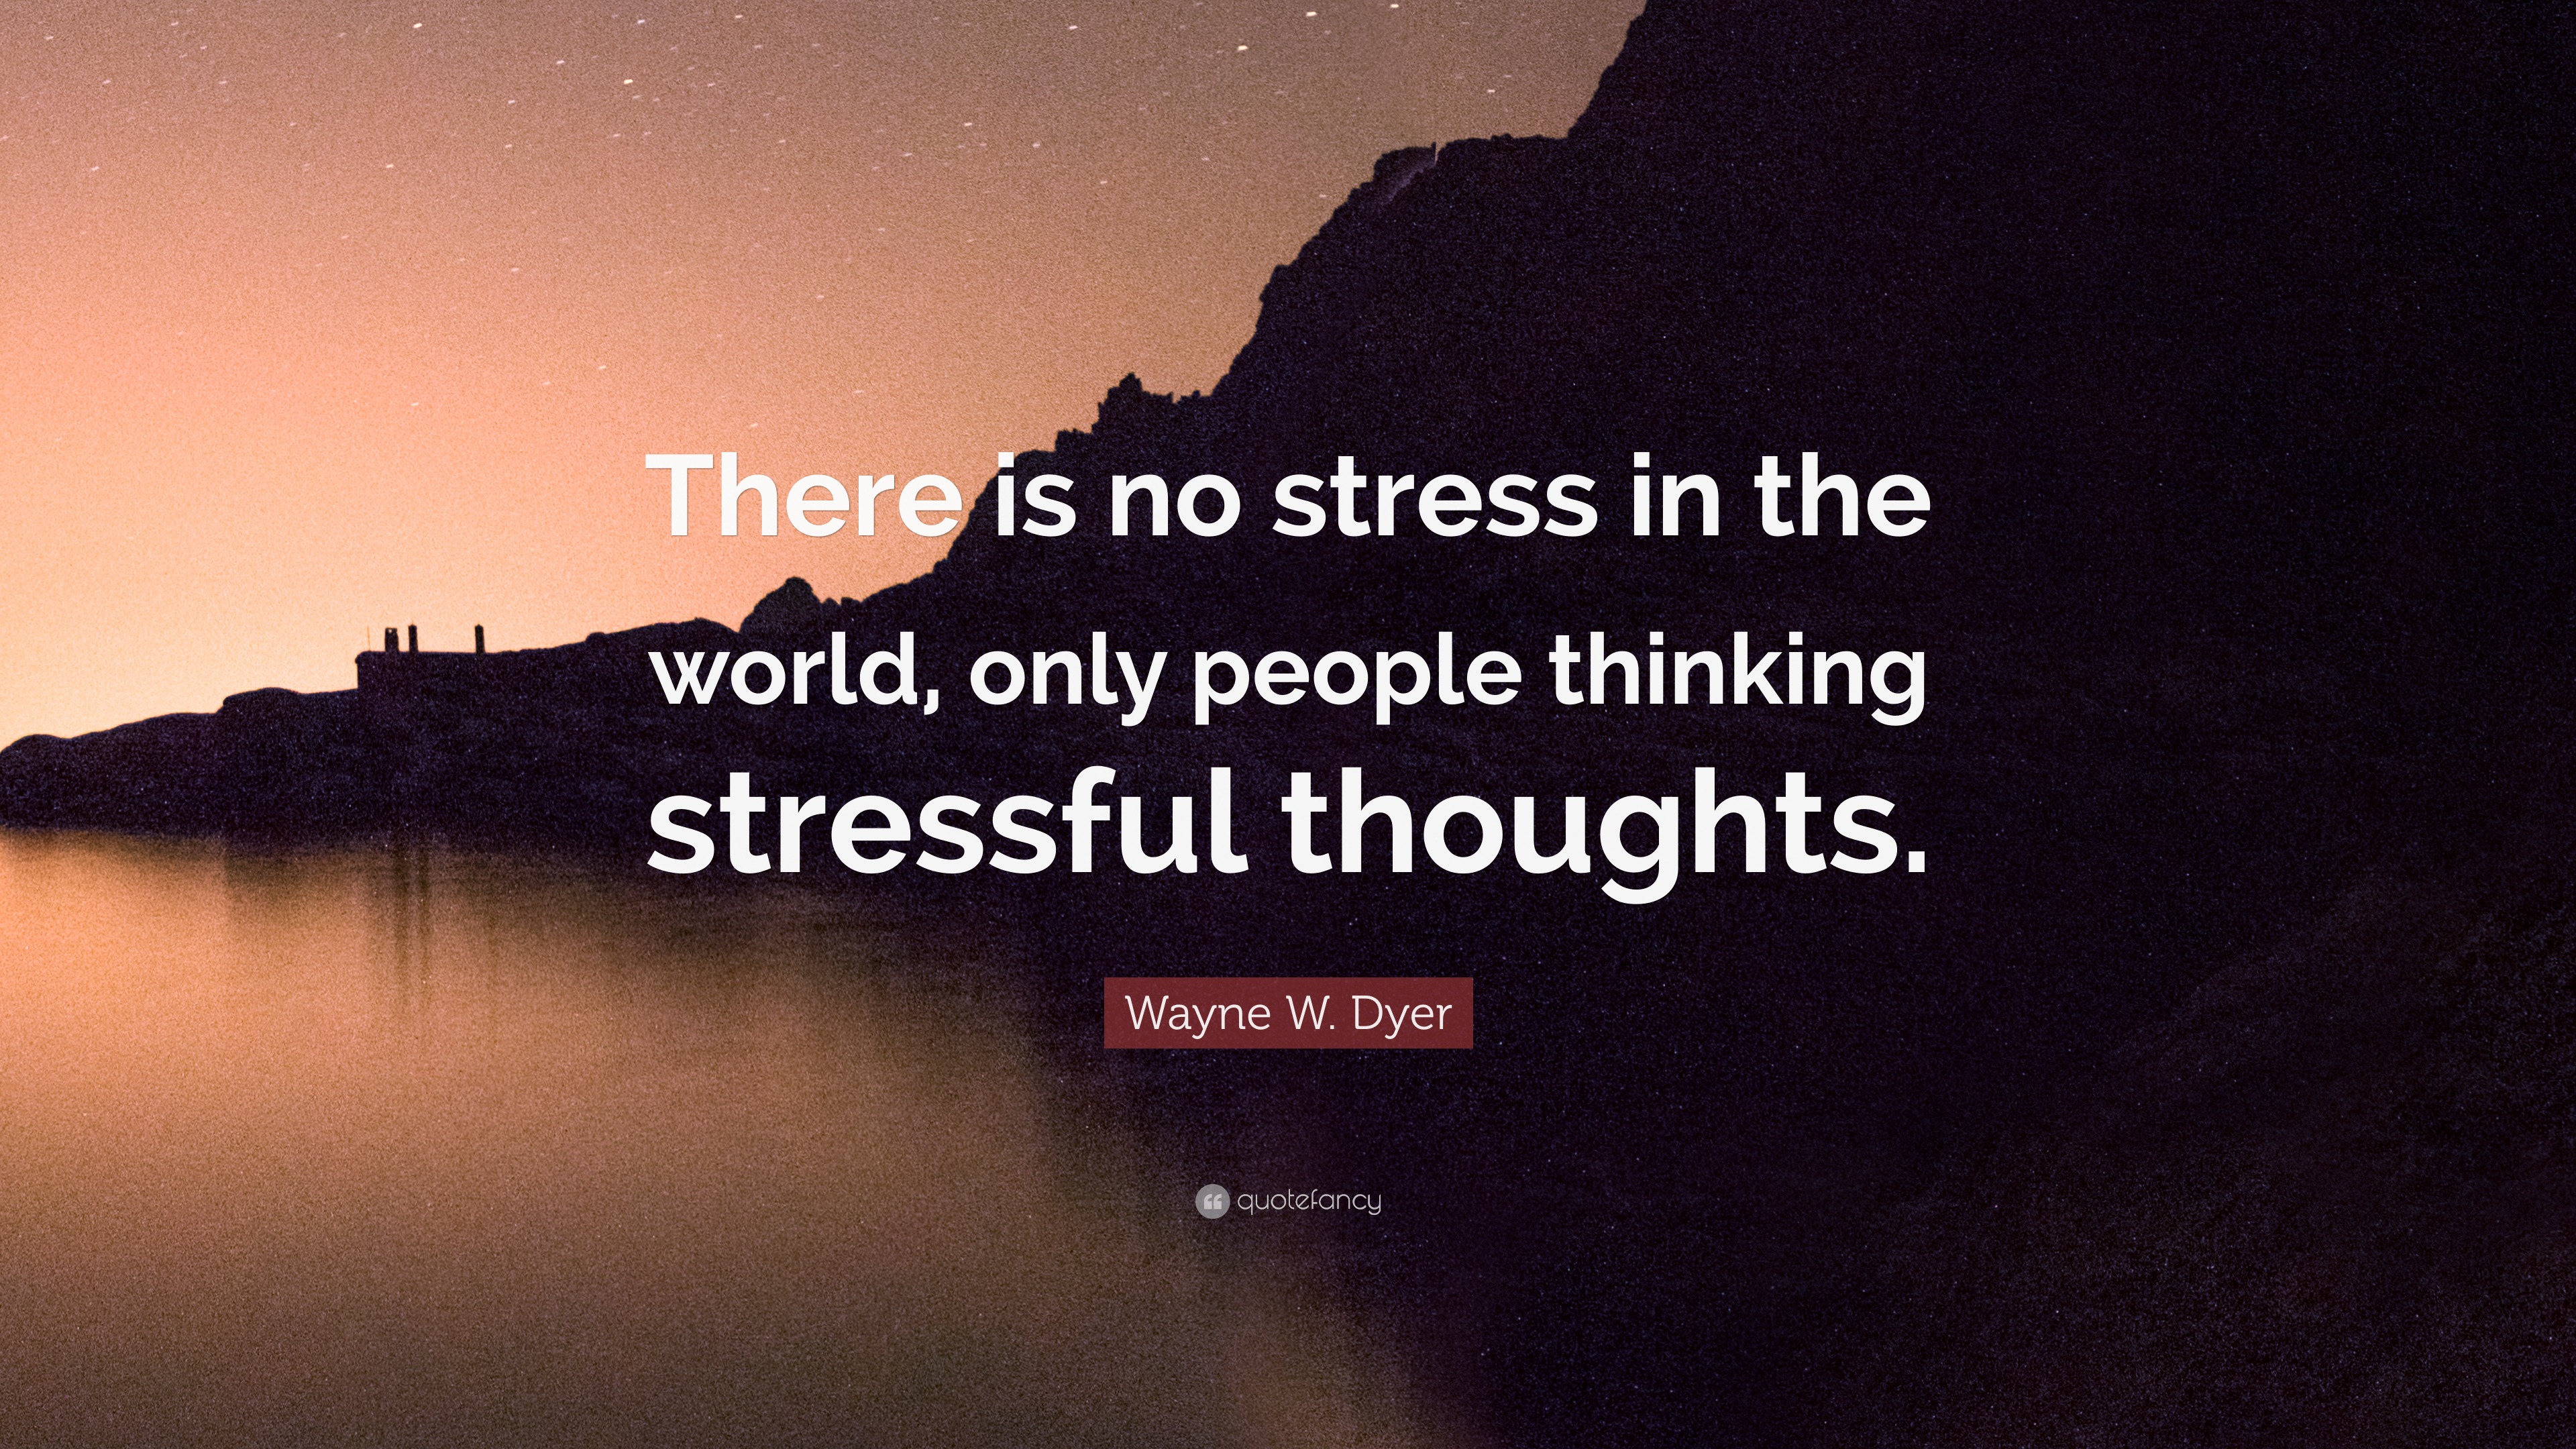 https://quotefancy.com/media/wallpaper/3840x2160/2068419-Wayne-W-Dyer-Quote-There-is-no-stress-in-the-world-only-people.jpg